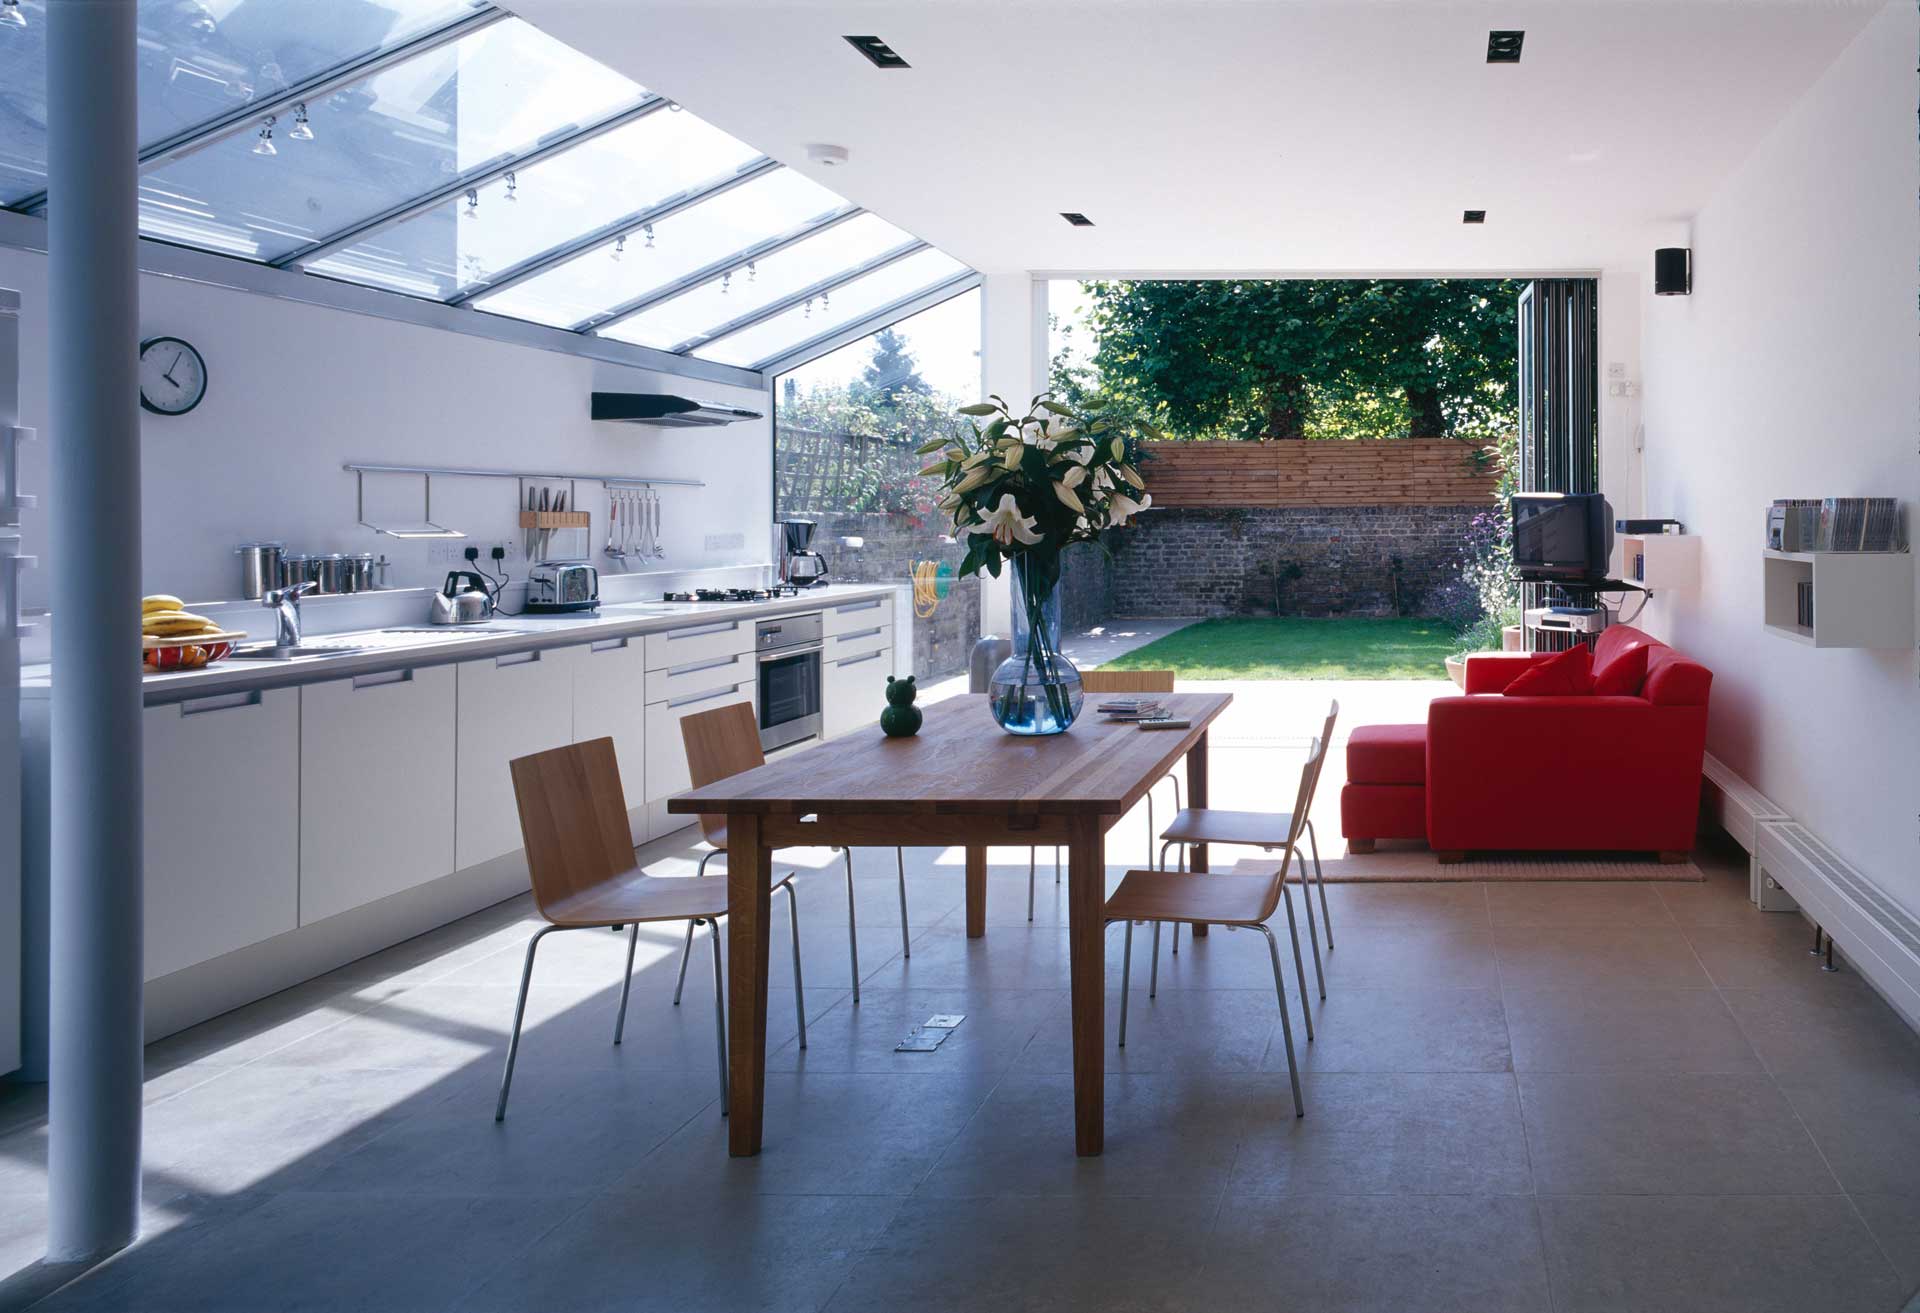 How To Make Your House Extension Thermally Efficient